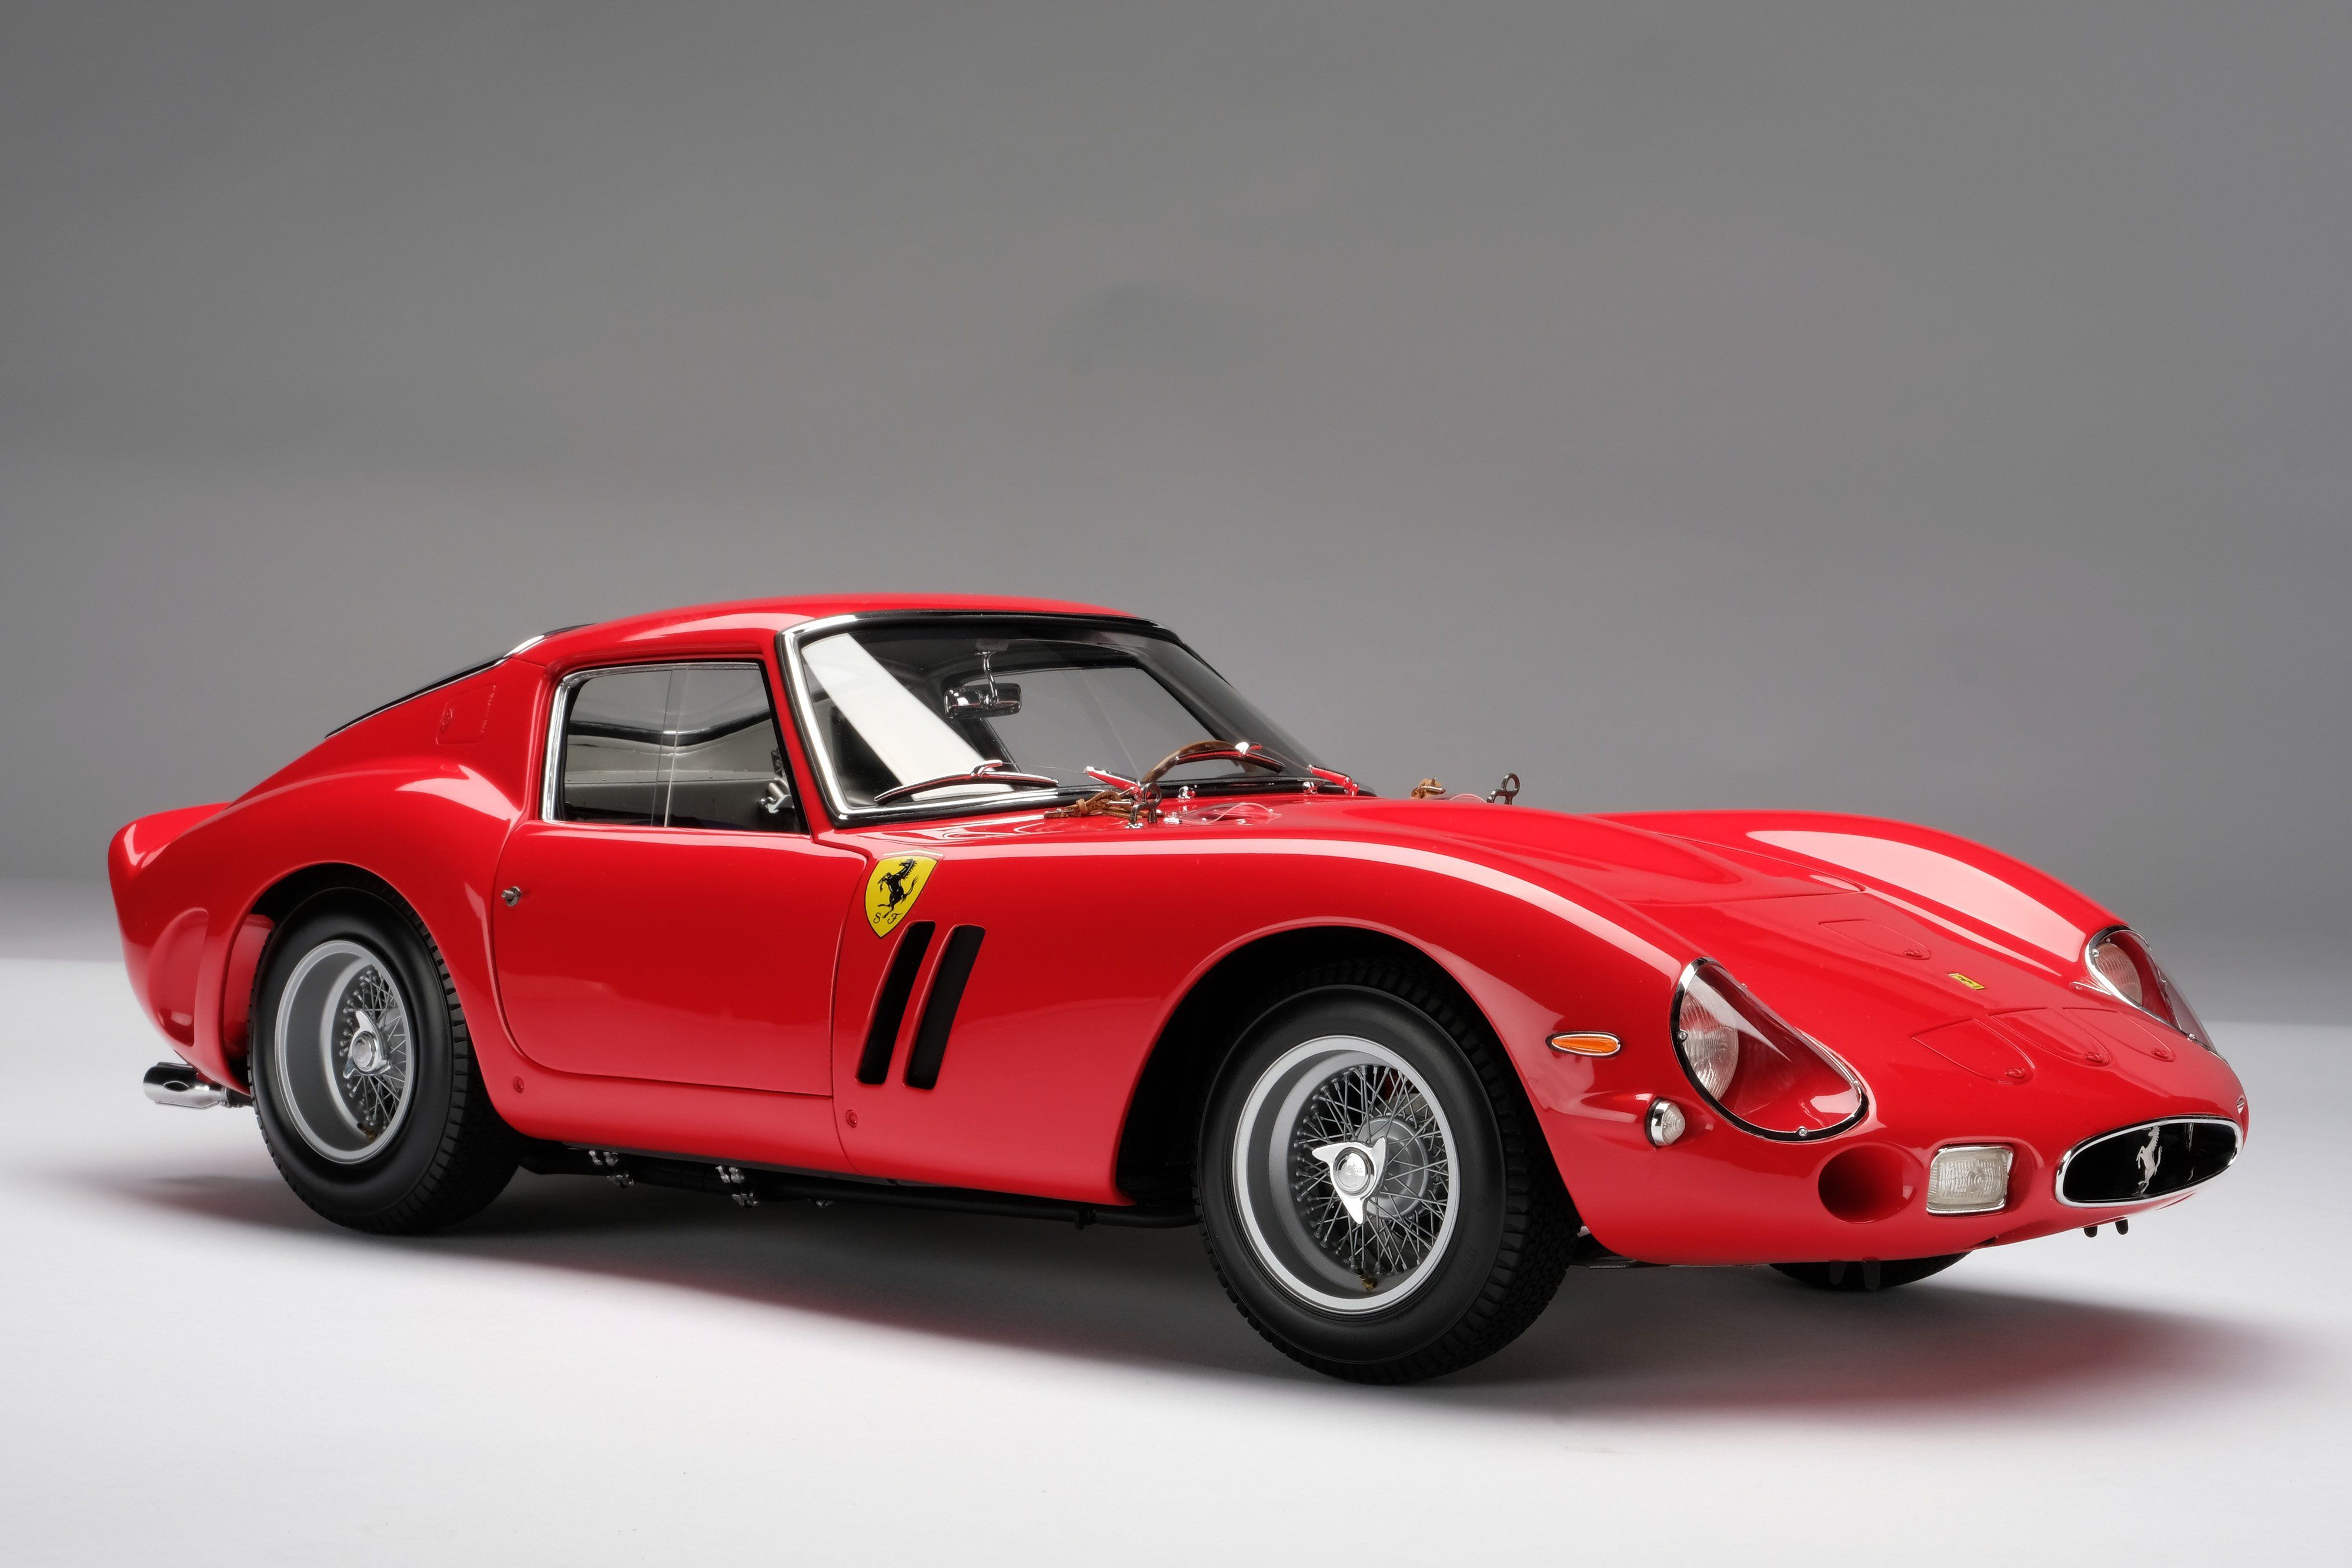 Ferrari 250 GTO Up For Auction In Red Front 3.5 View